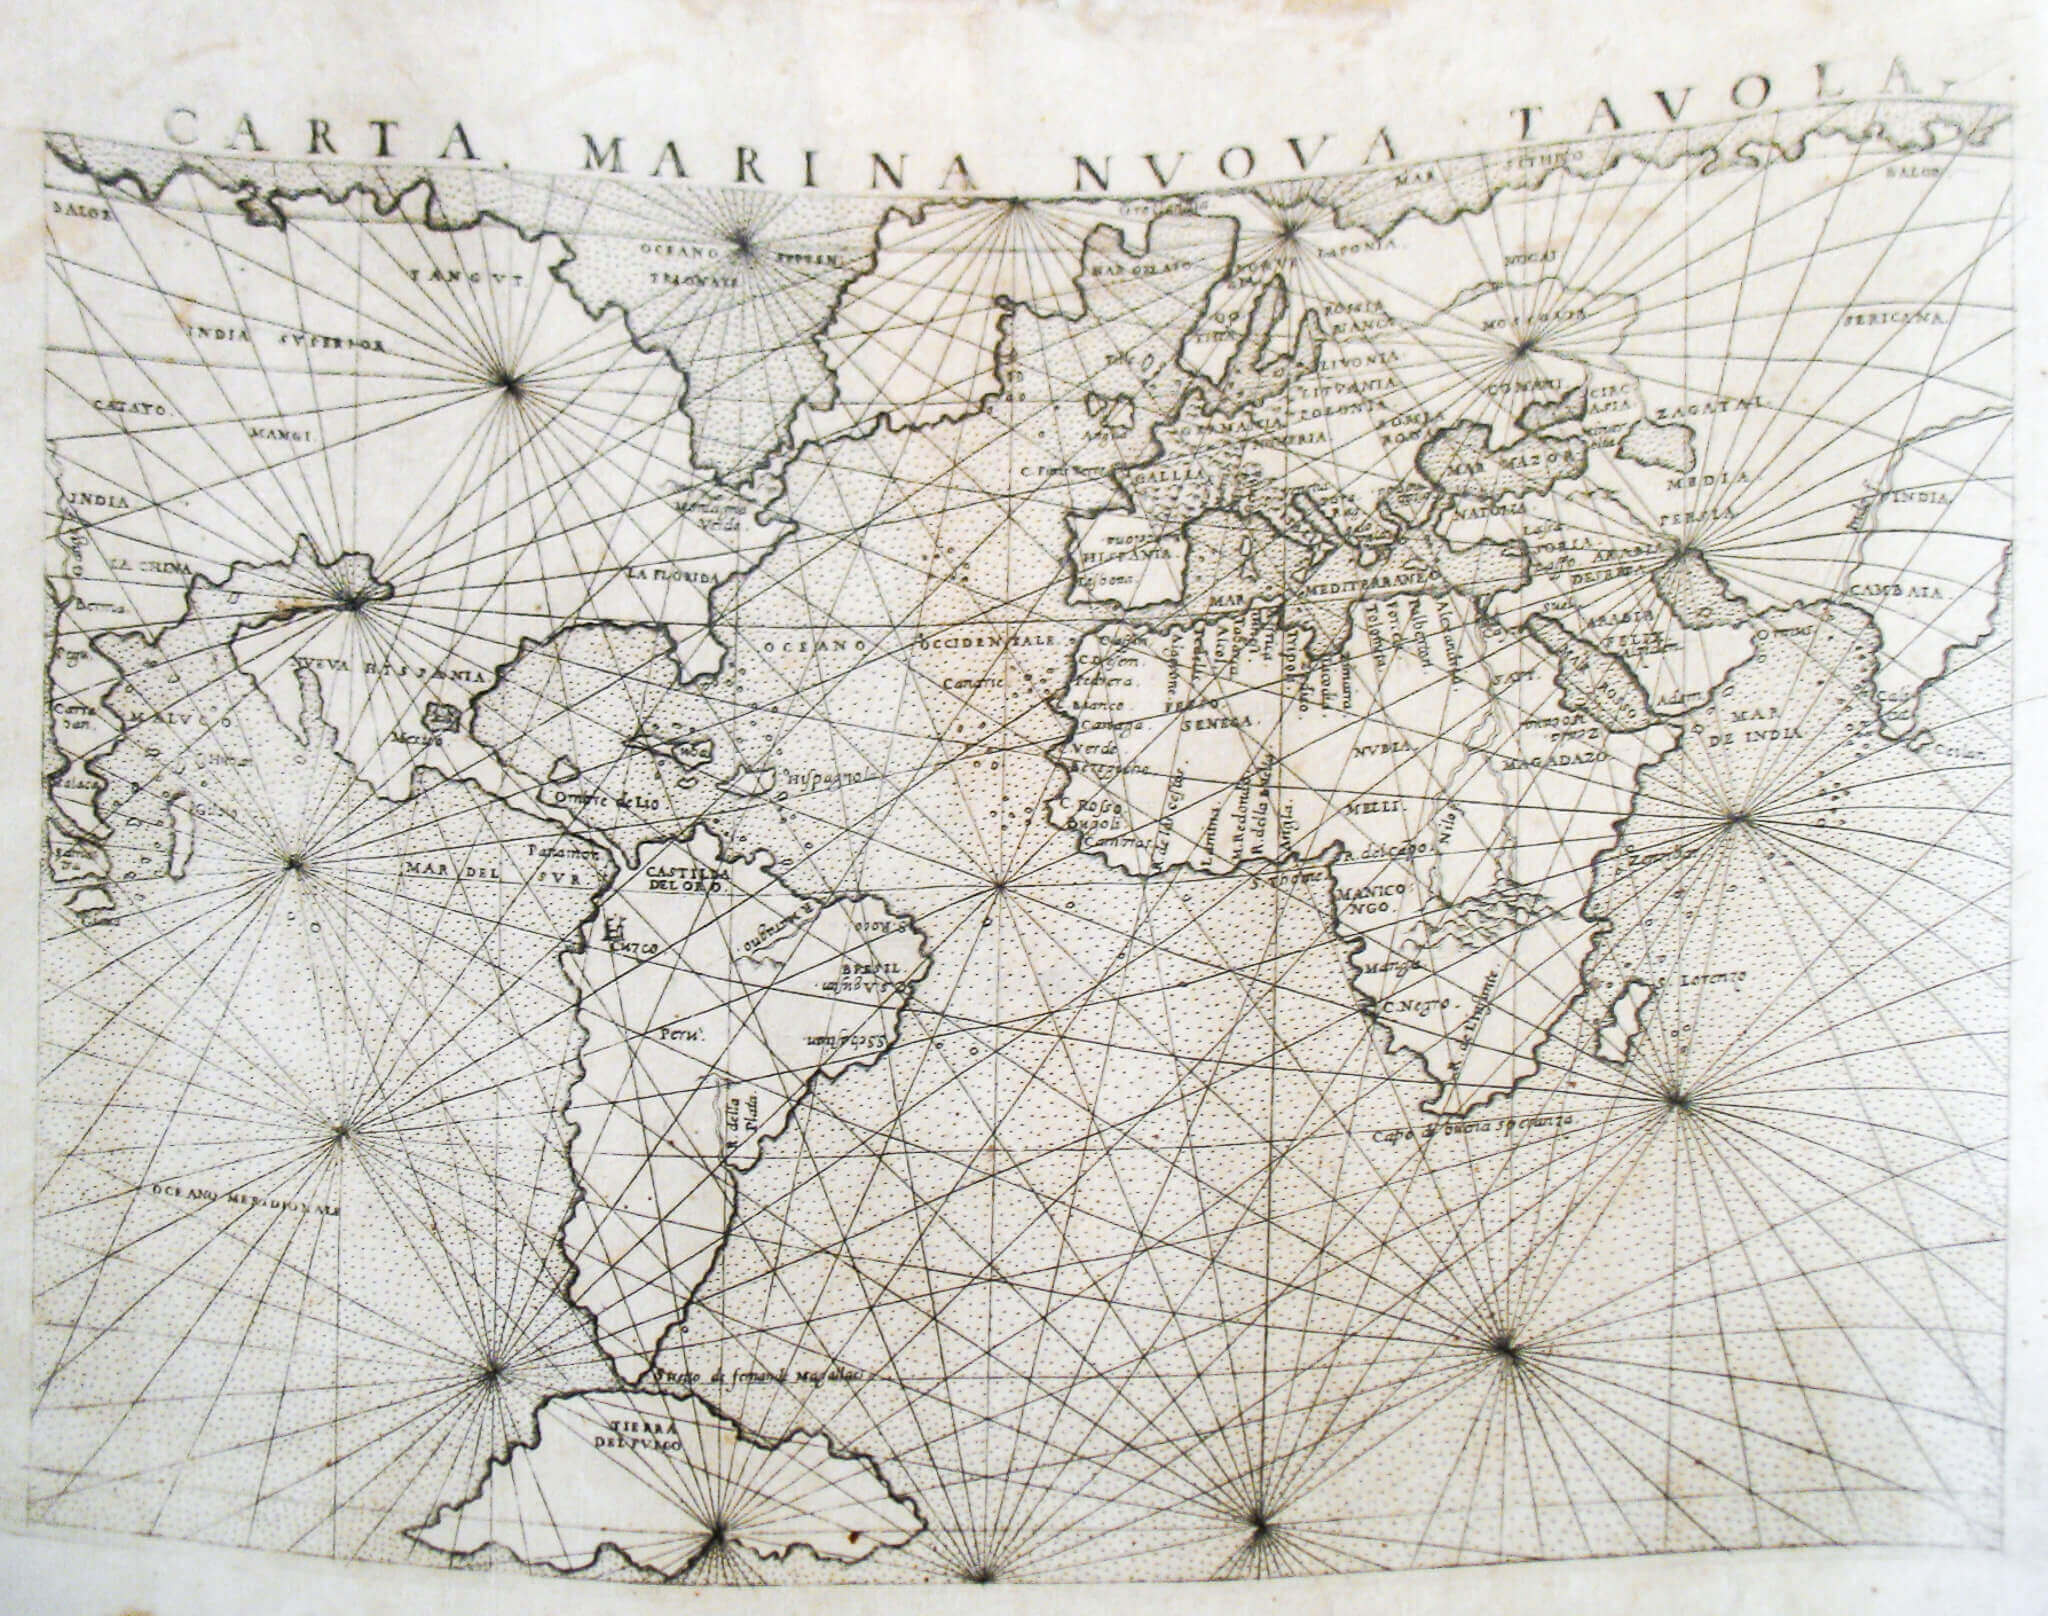 An antique world map Carta Marina from 1561 by Girolamo Ruscelli, who worked in Venice, showing North America connected with Asia